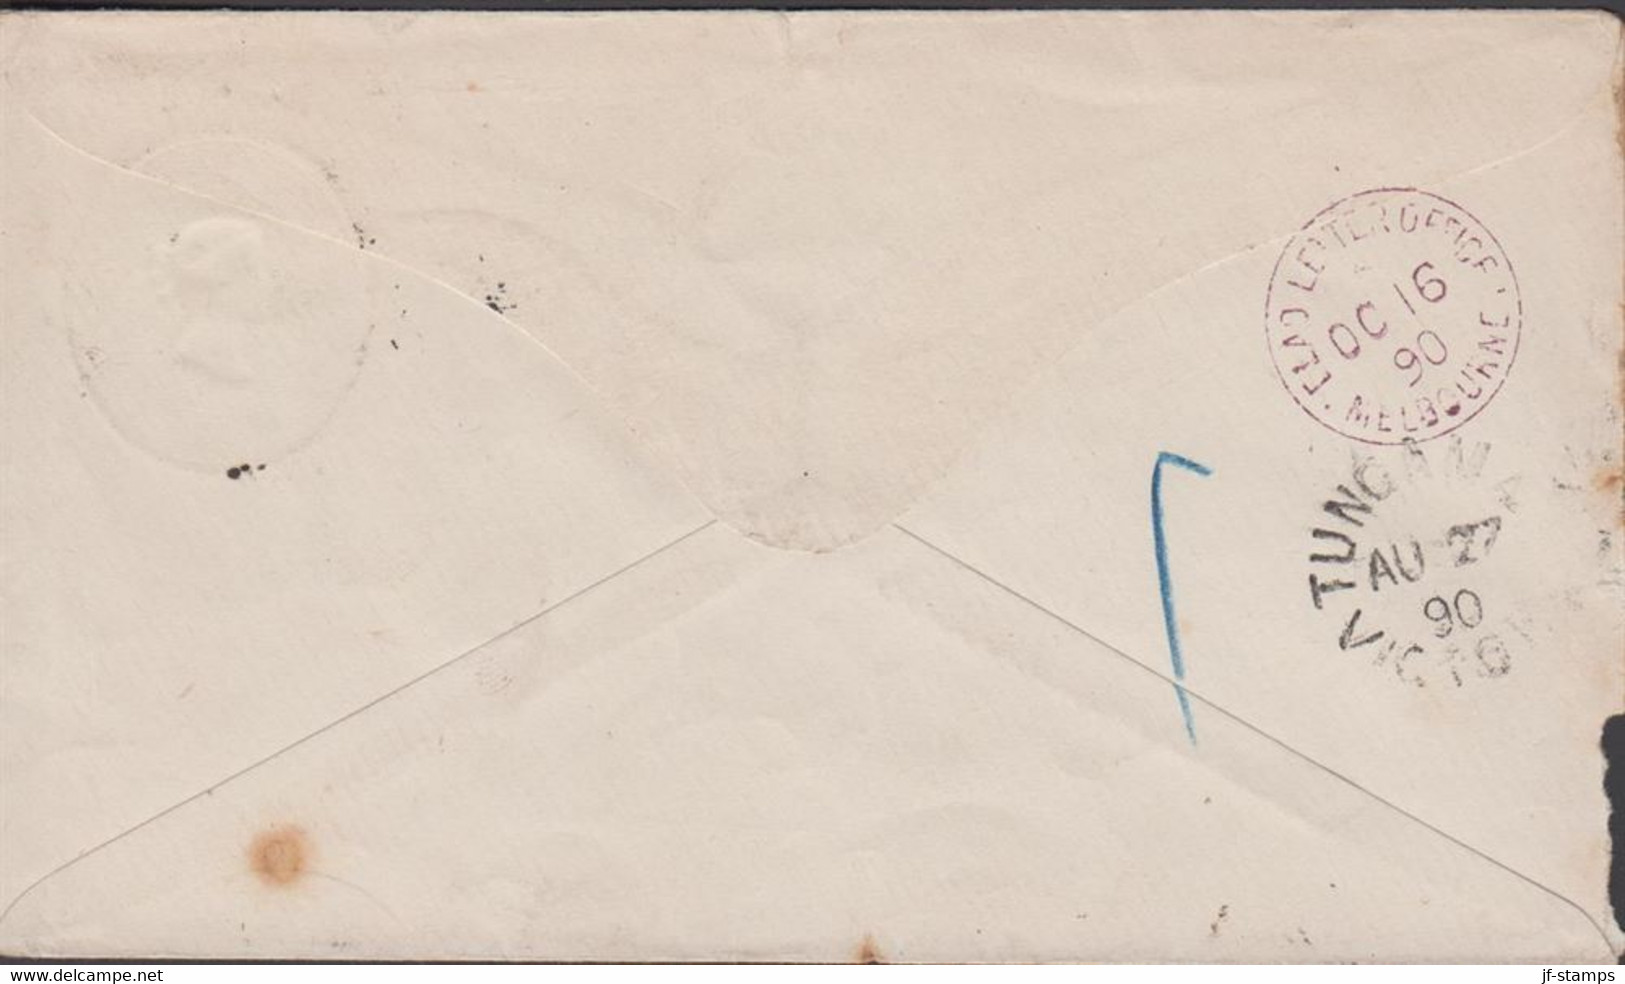 1890. VICTORIA POSTAGE ONE PENNY VICTORIA Envelope To Tungmal Cancelled MELBOURNE AU 26 90 + VICTORIA. Rev... - JF430272 - Covers & Documents